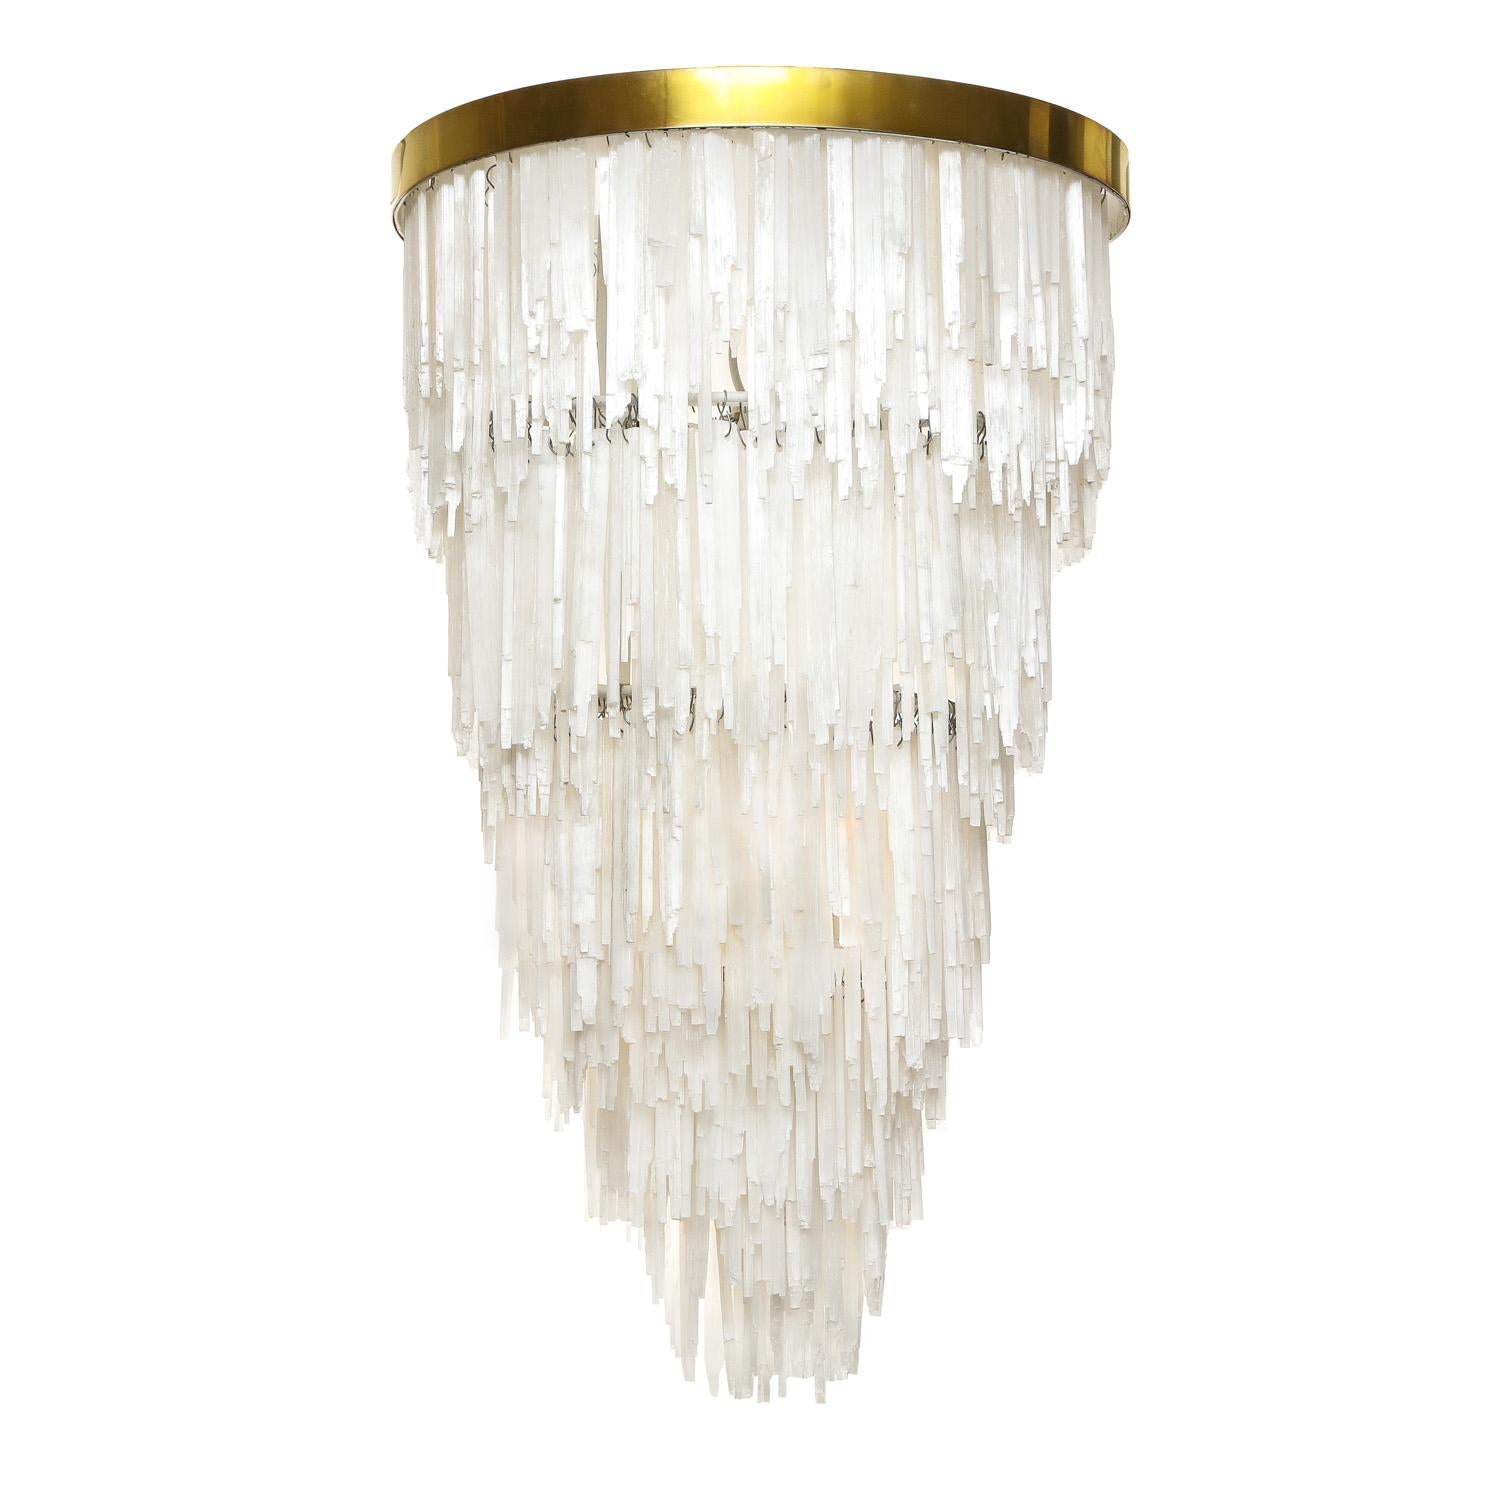 Striking tiered chandelier of cascading Selenite crystals with brass body and canopy. Italian, 1970's.